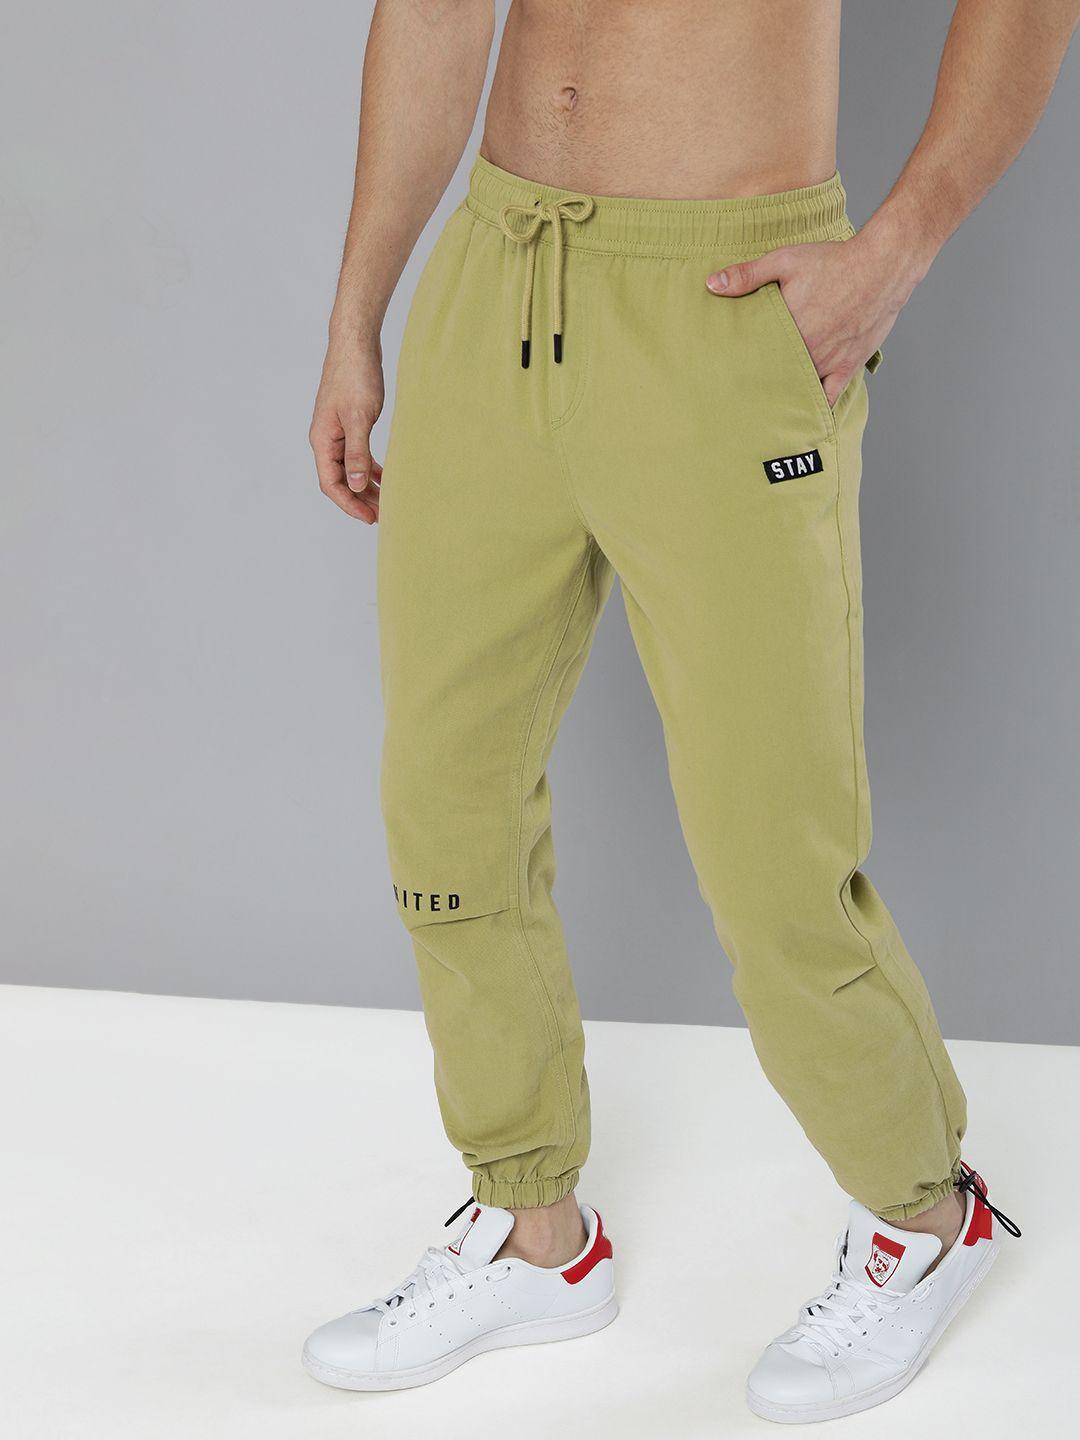 here&now-men-olive-green-&-black-printed-joggers